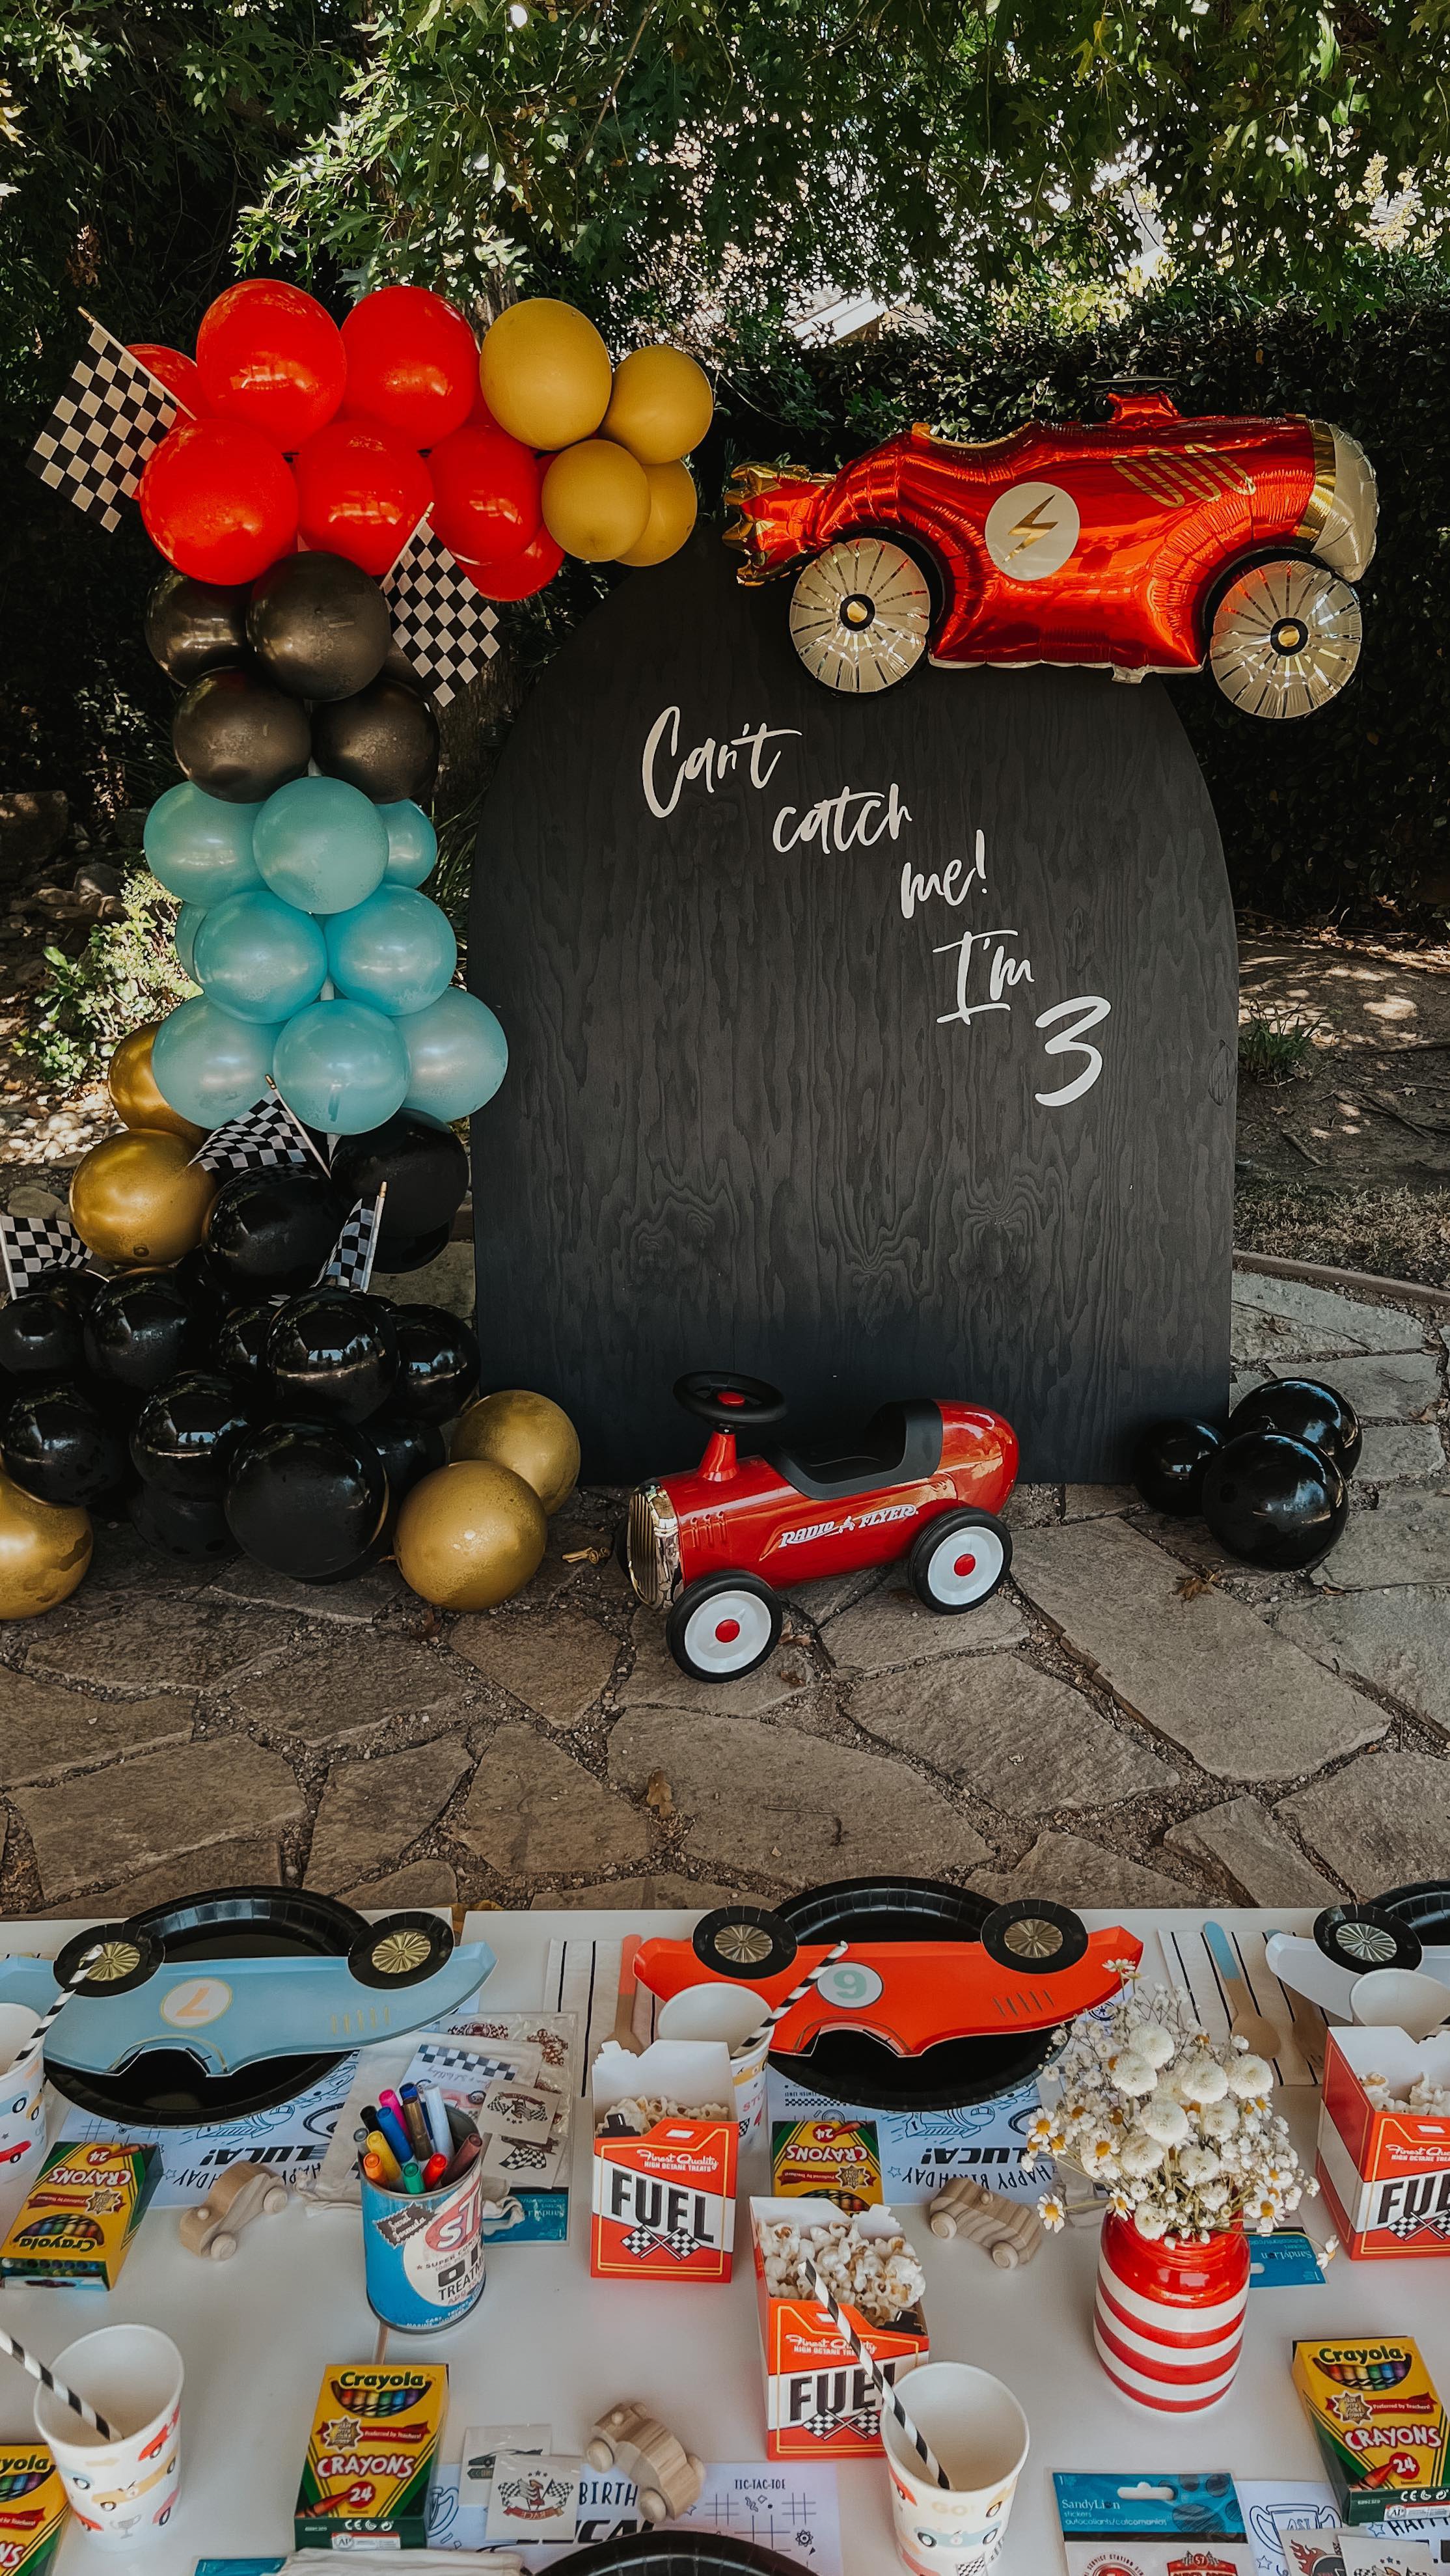 Can’t Catch Me, I’m 3! 🏎 All the race car party details are on the blog today with links and DIYs! 

#racecars #birthdayparty #3rdbirthday #toddlerbirthday #racecarbirthday #partydecorations #diyparty #kidsbirthday #kidsparties #cantcatchme